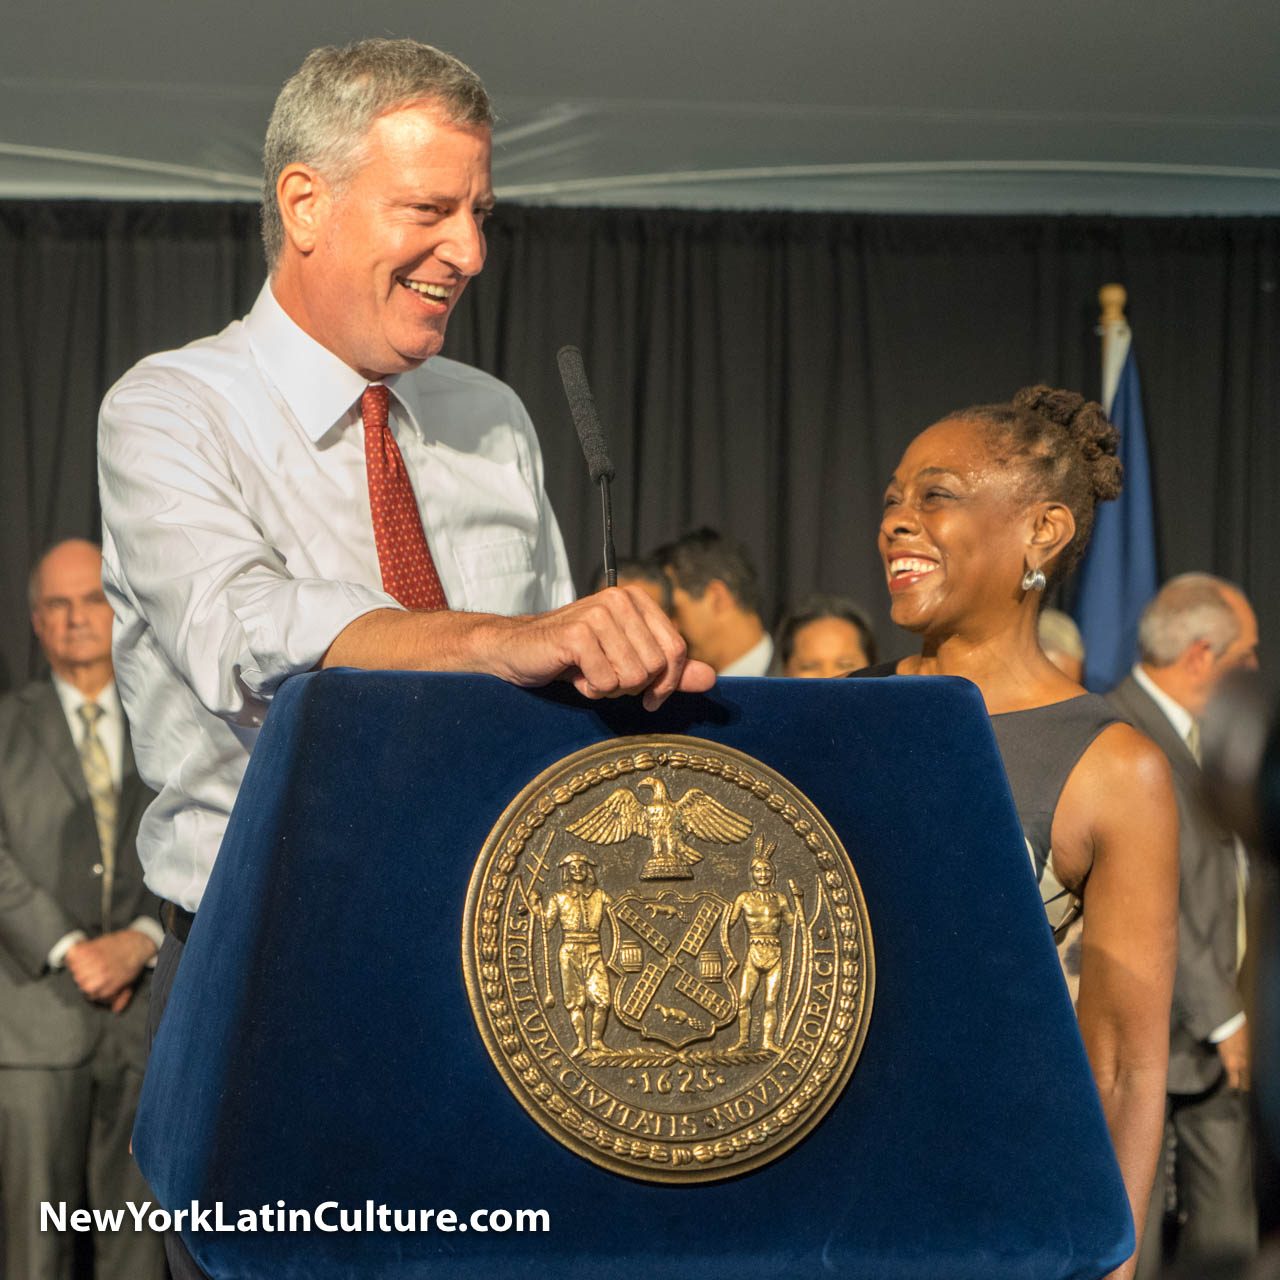 New York City Mayor Bill de Blasio and First Lady Chirlane McCray have a great connection